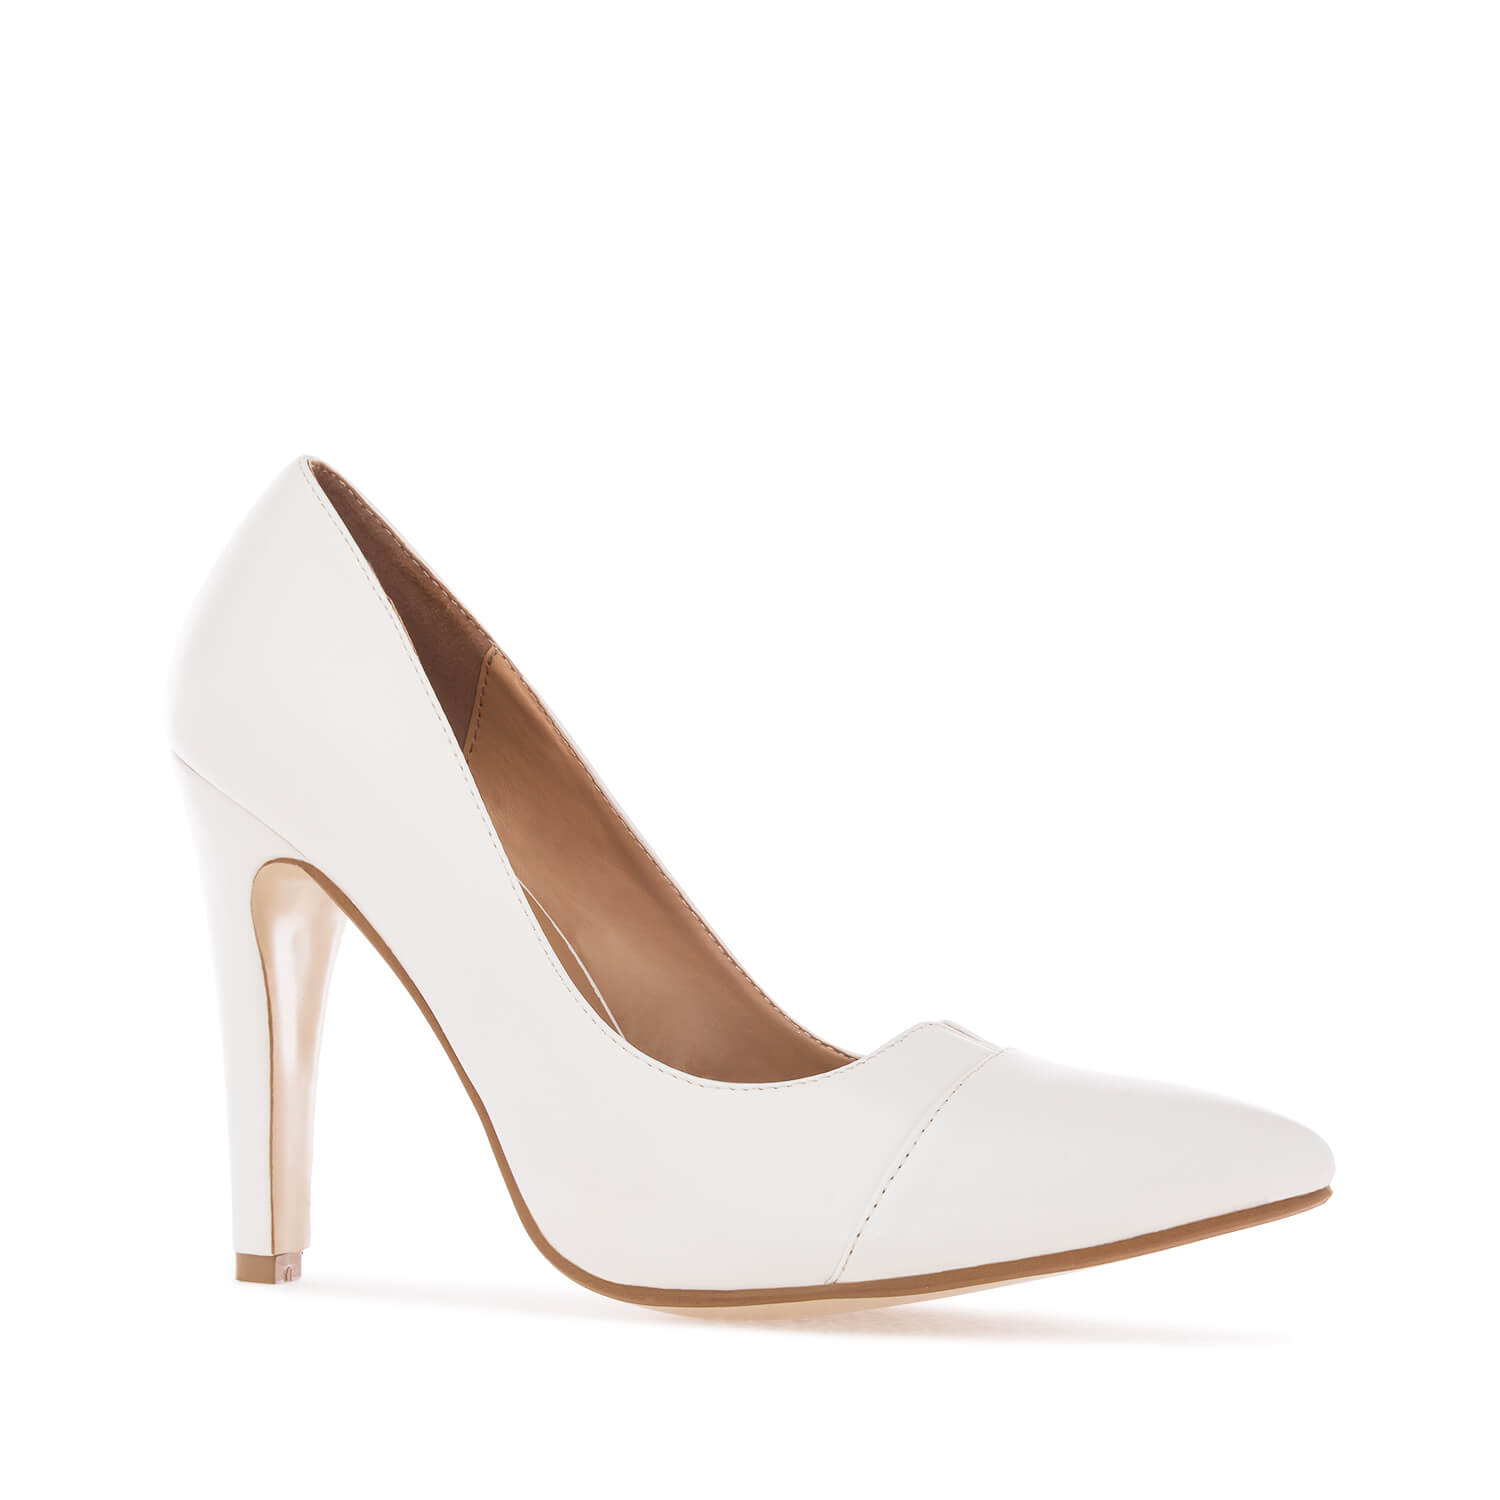 Fine Tip Heeled Shoes in White faux Leather - Brides, Women, Large ...